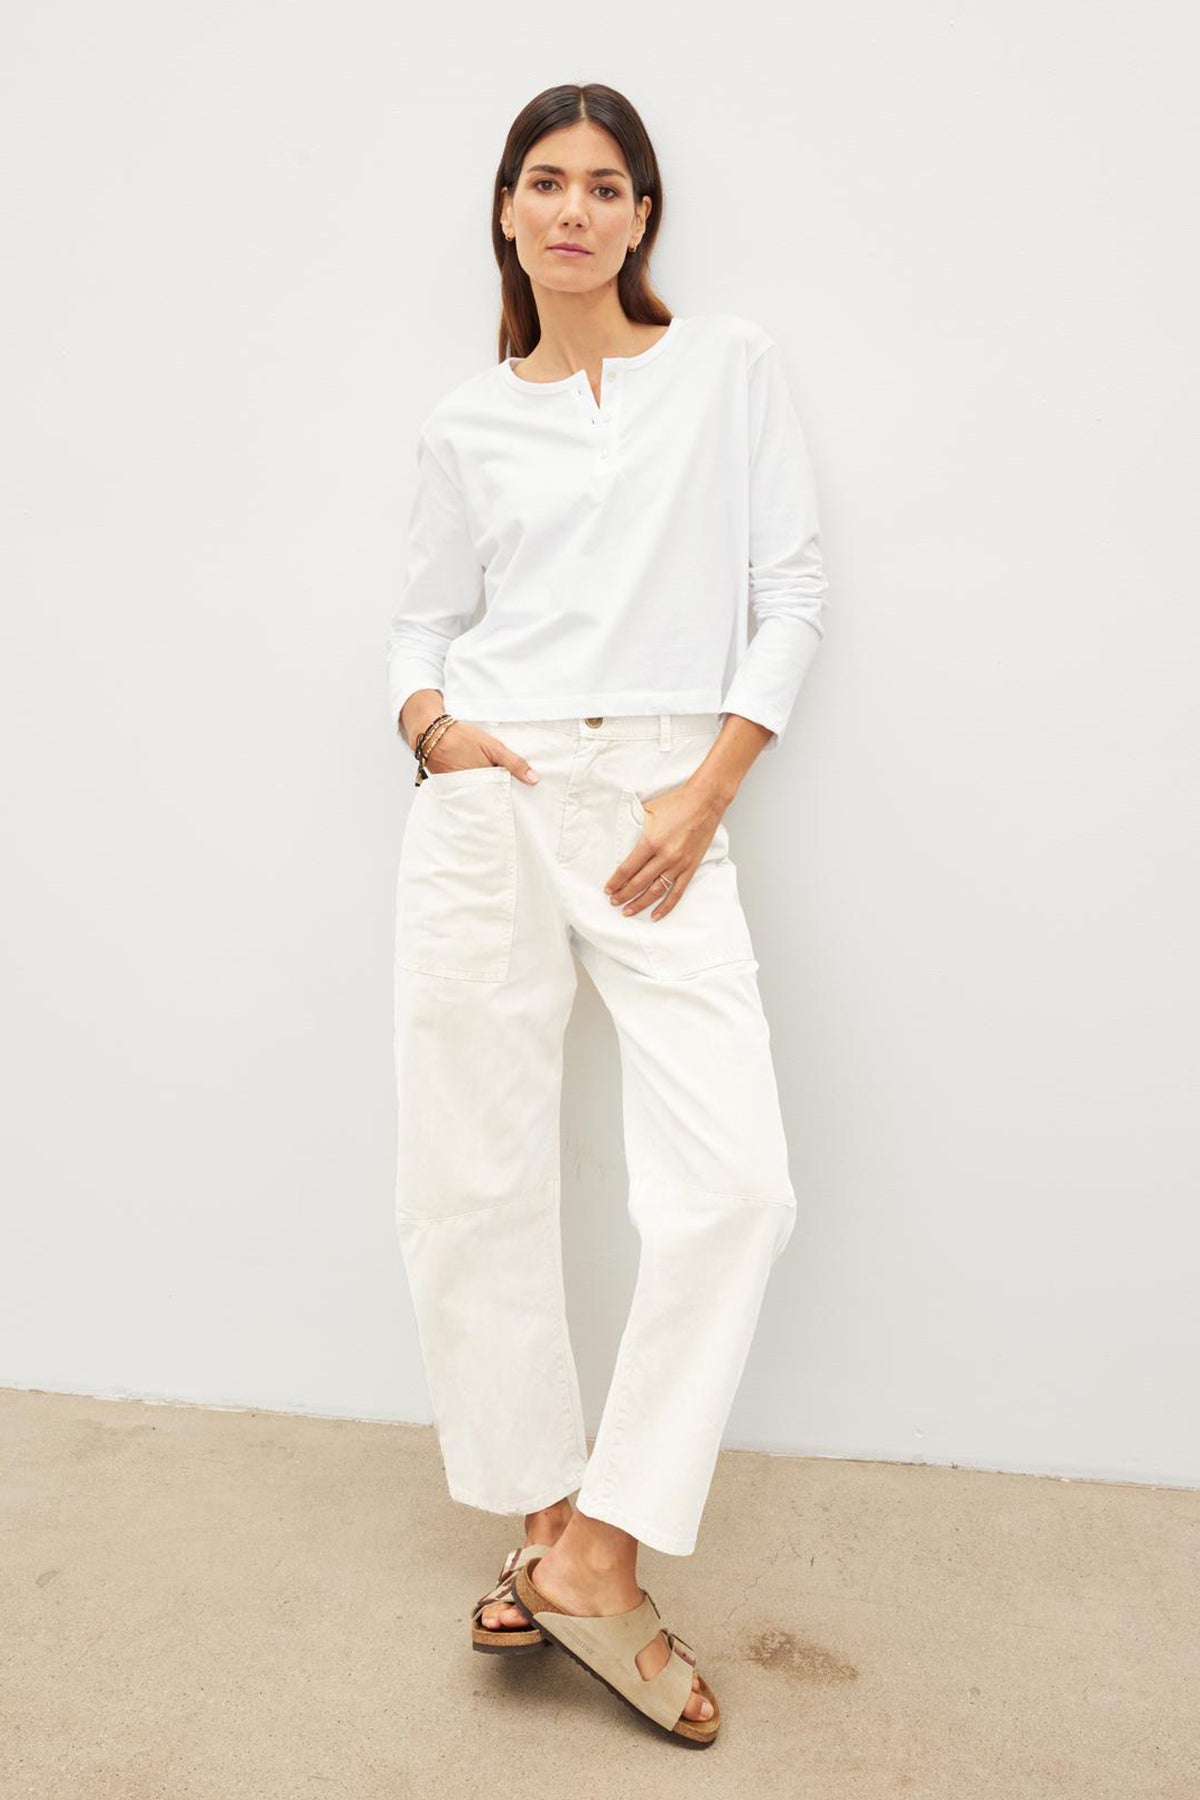 A woman stands against a plain background, wearing a white long-sleeve top, White BRYLIE SANDED TWILL UTILITY PANT with patch pockets, and brown sandals by Velvet by Graham & Spencer.-36816617210049